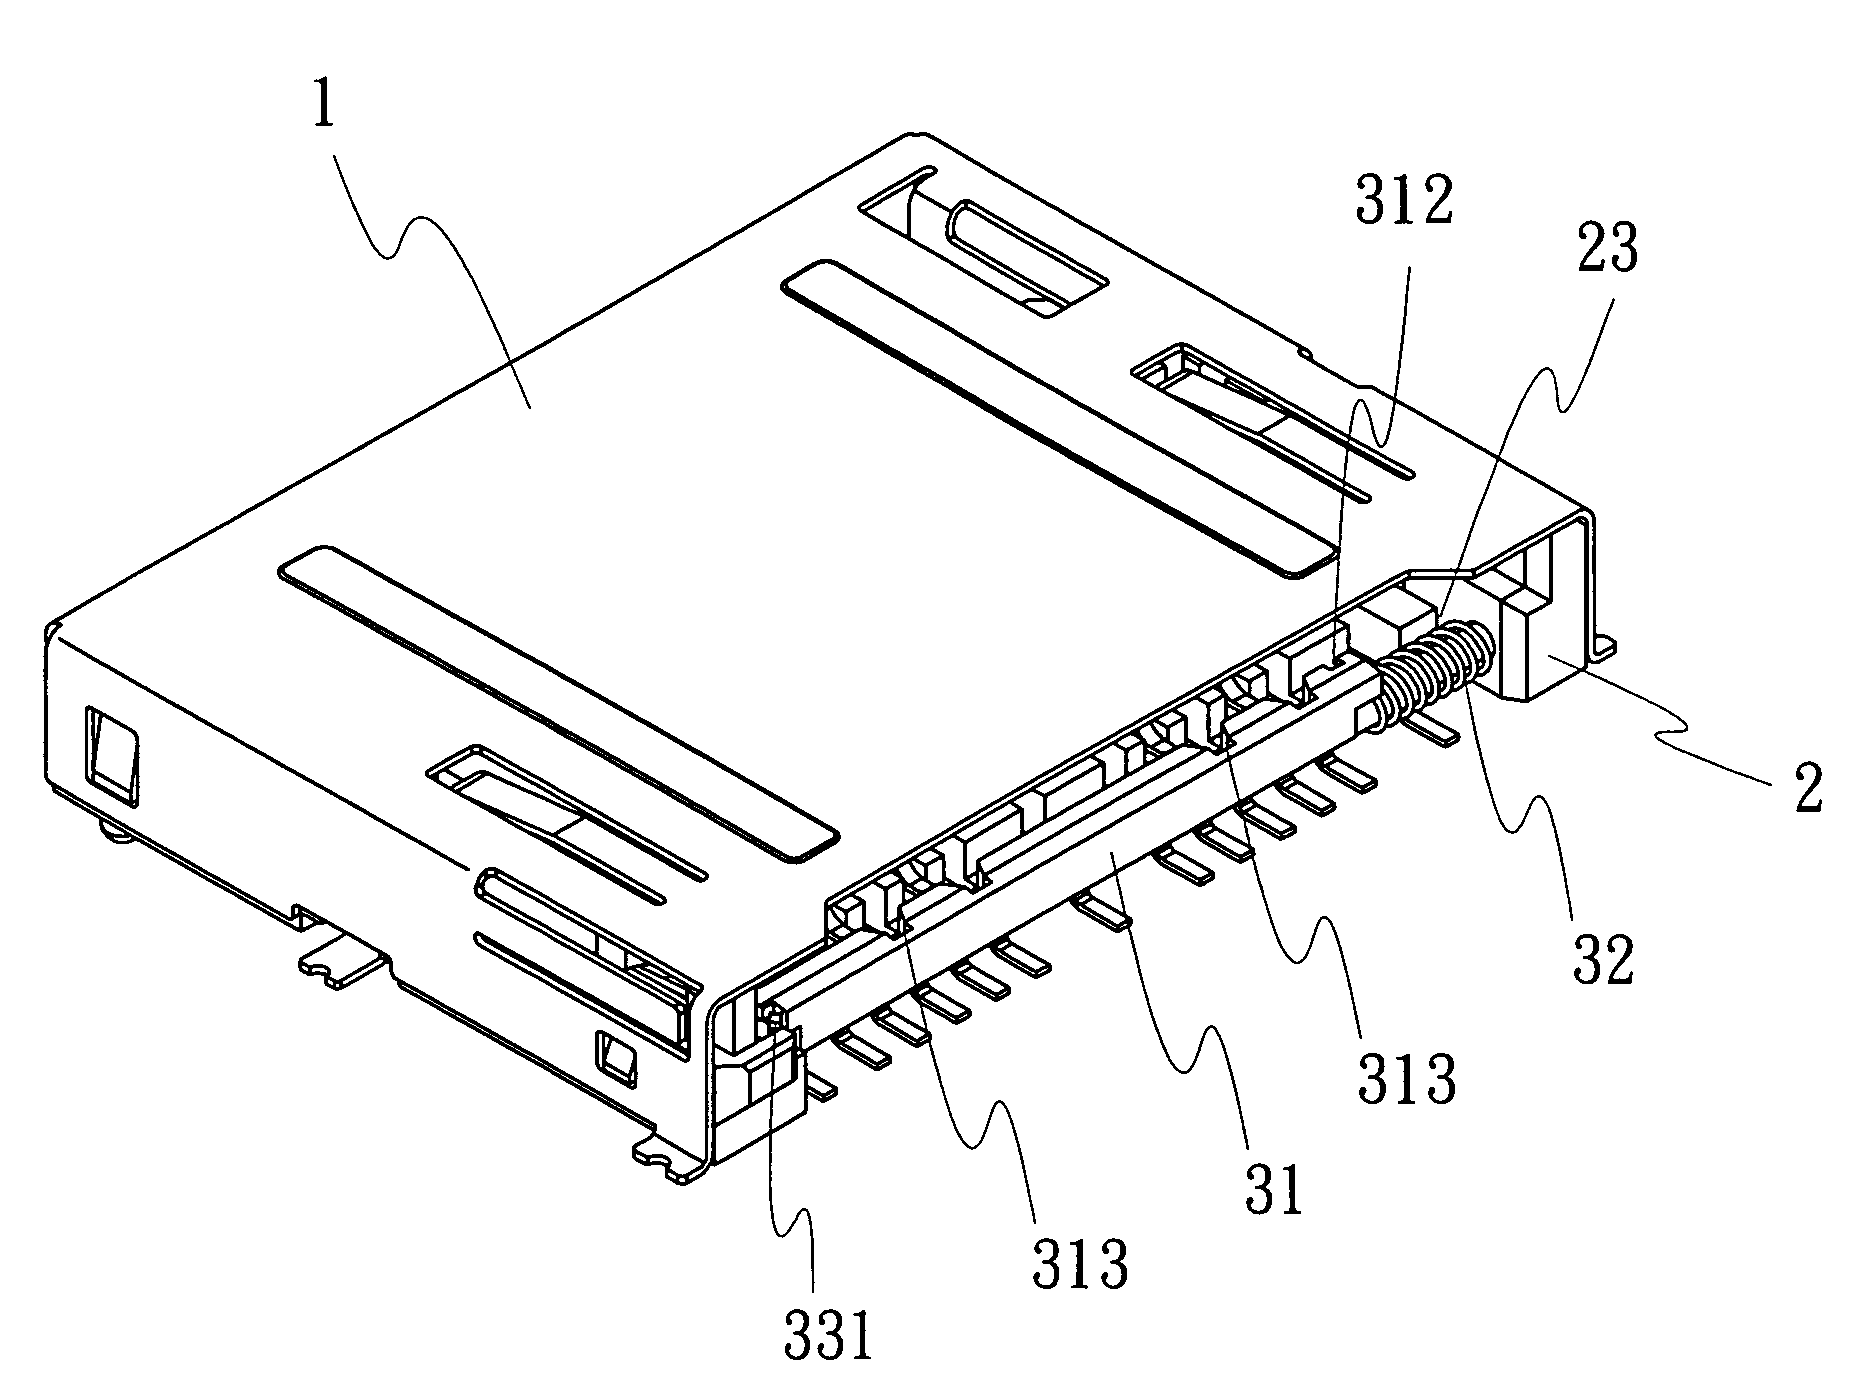 Universal memory card adapter having a movable door